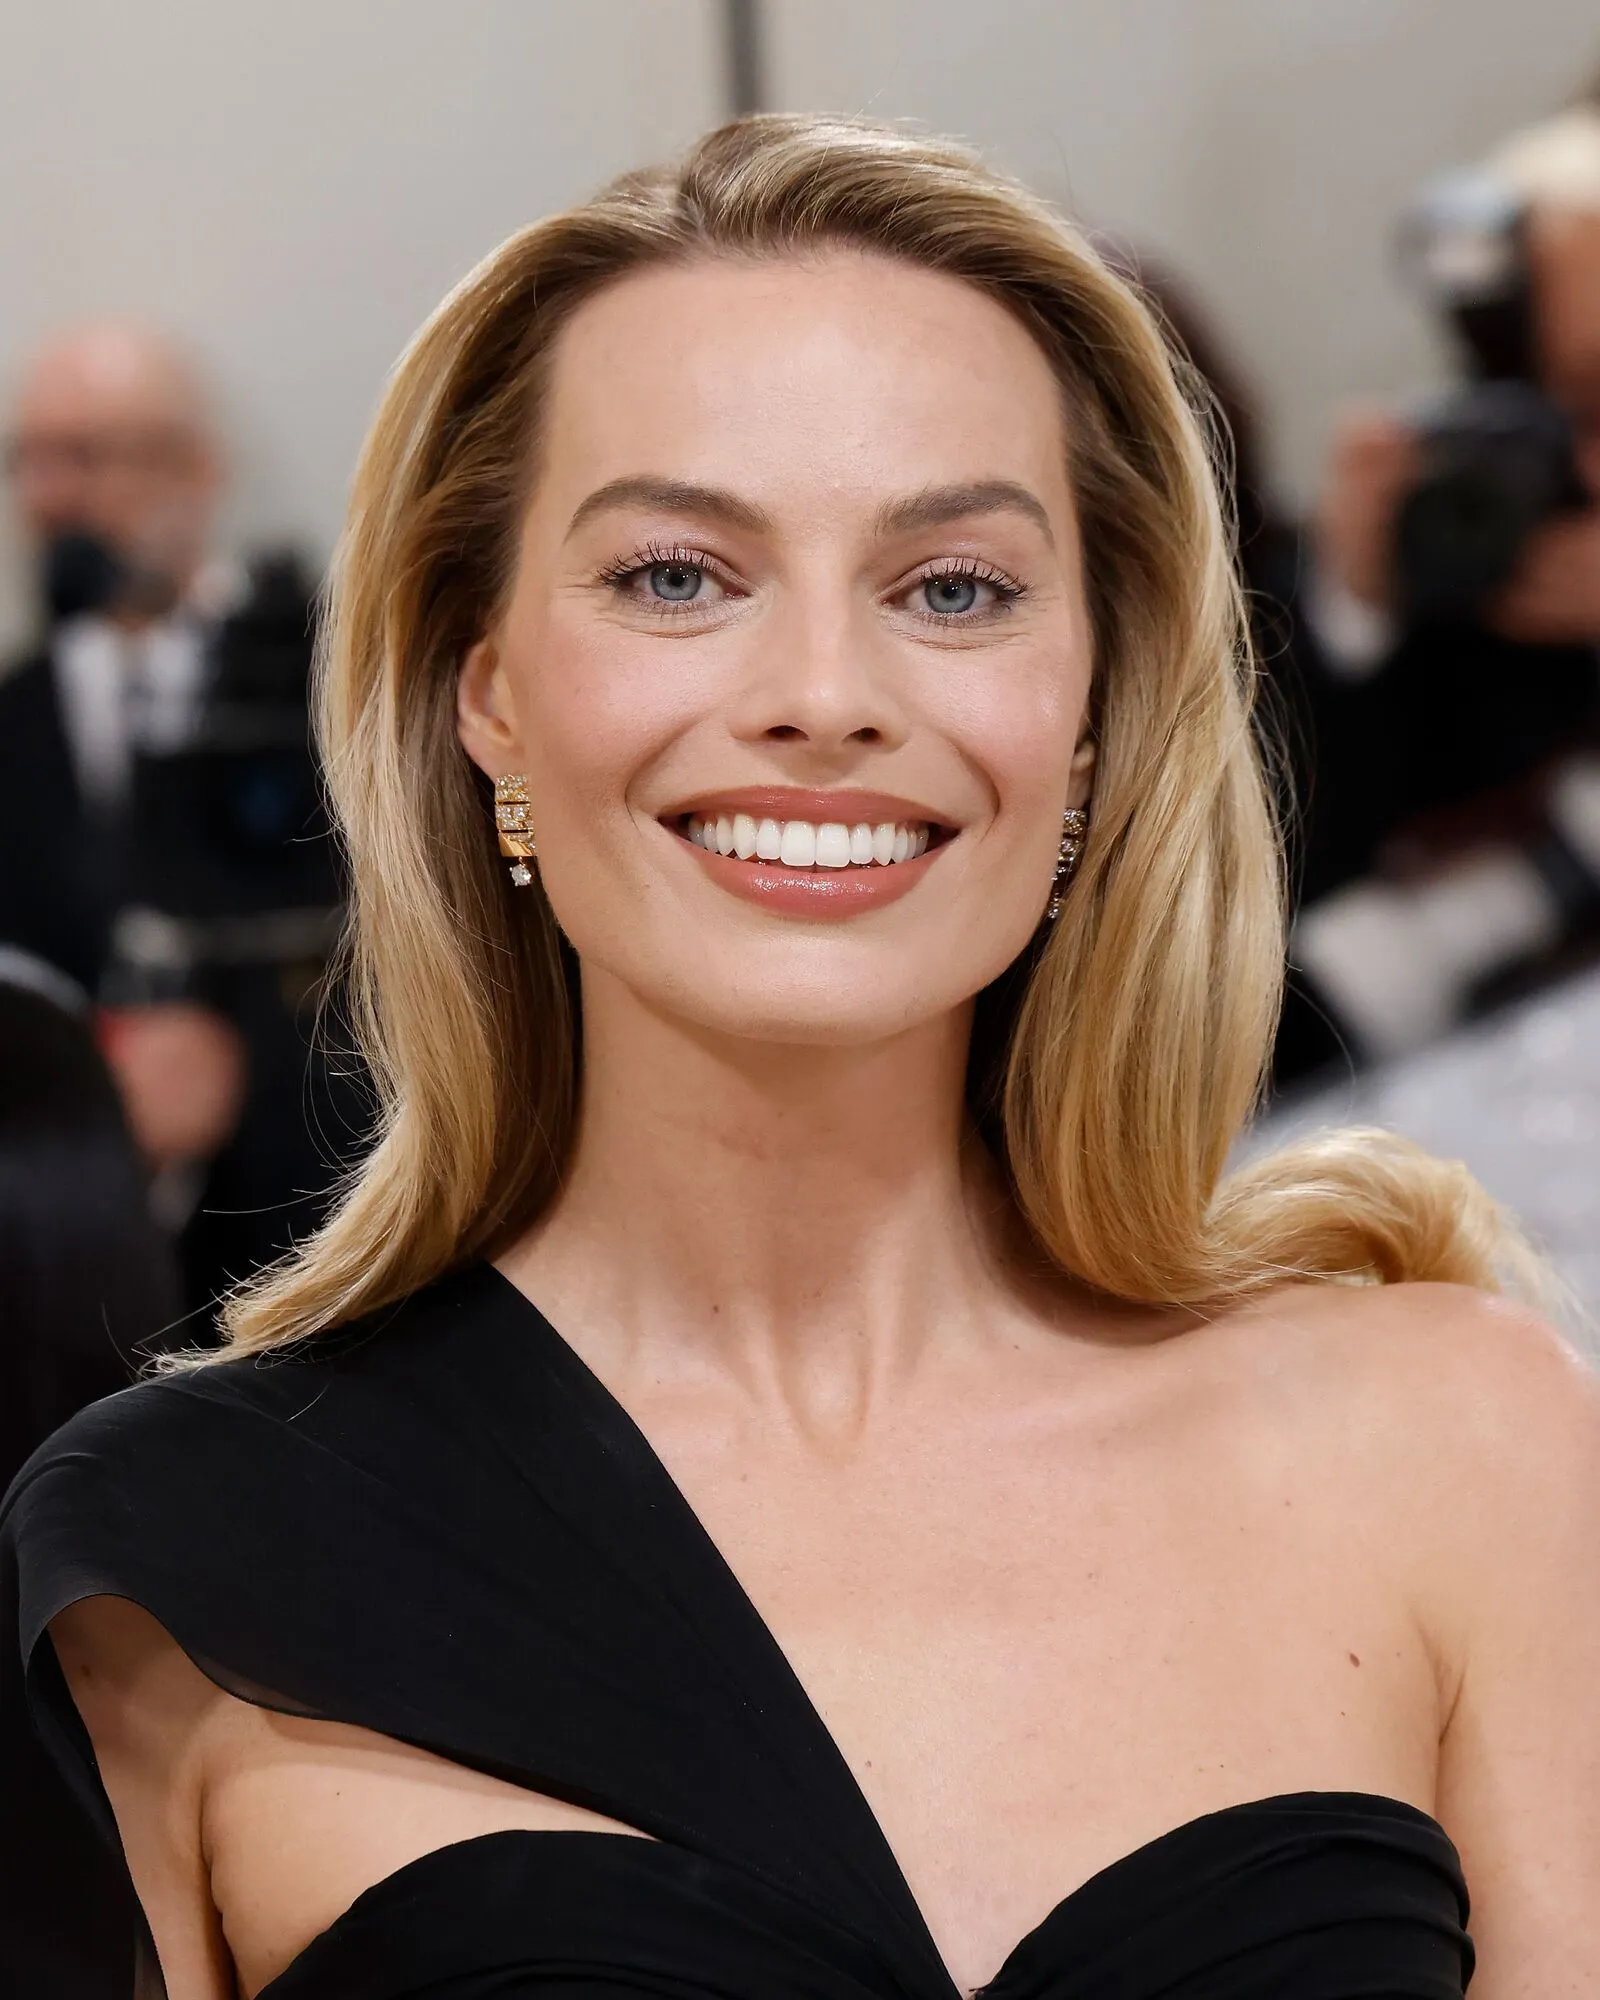 From spectacular brunette to blonde Barbie: how Margot Robbie changed during her acting career